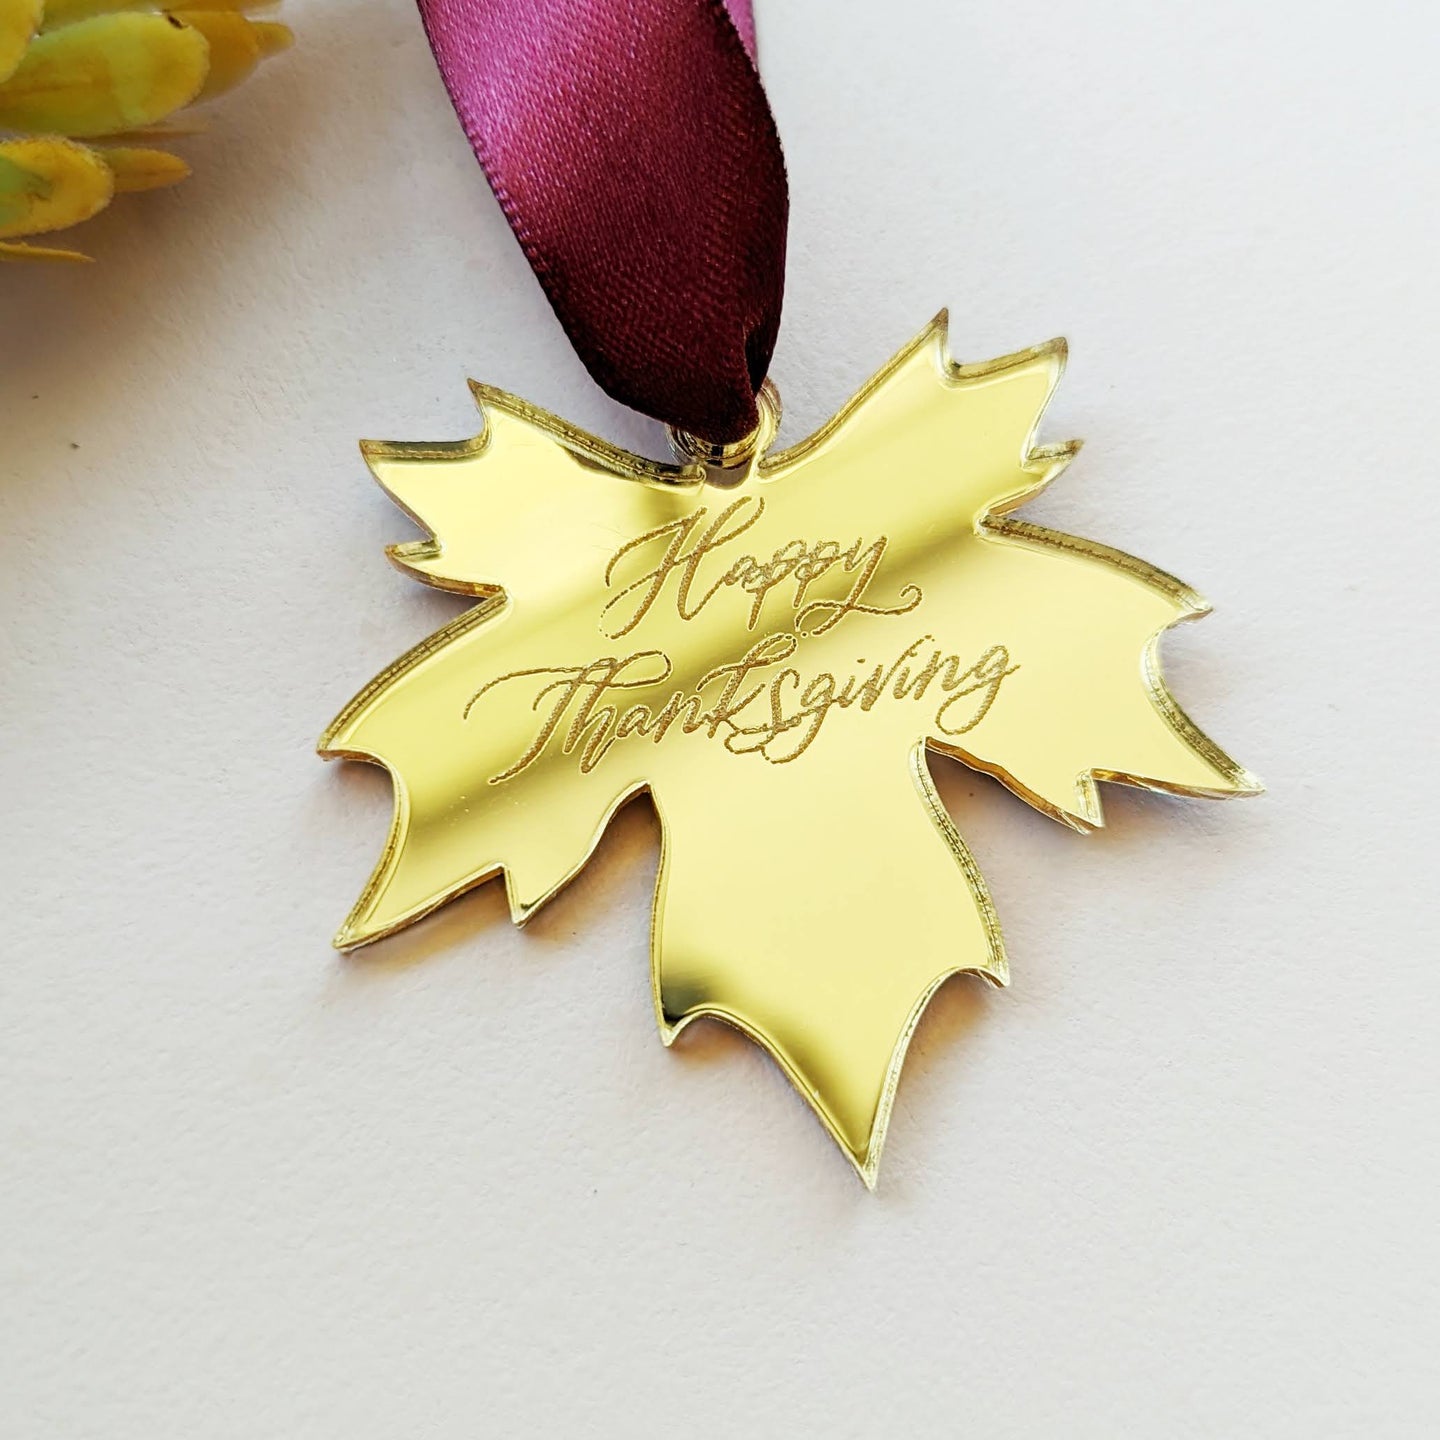 Happy Thanksgiving Acrylic Gift Tags / Maple Leaf